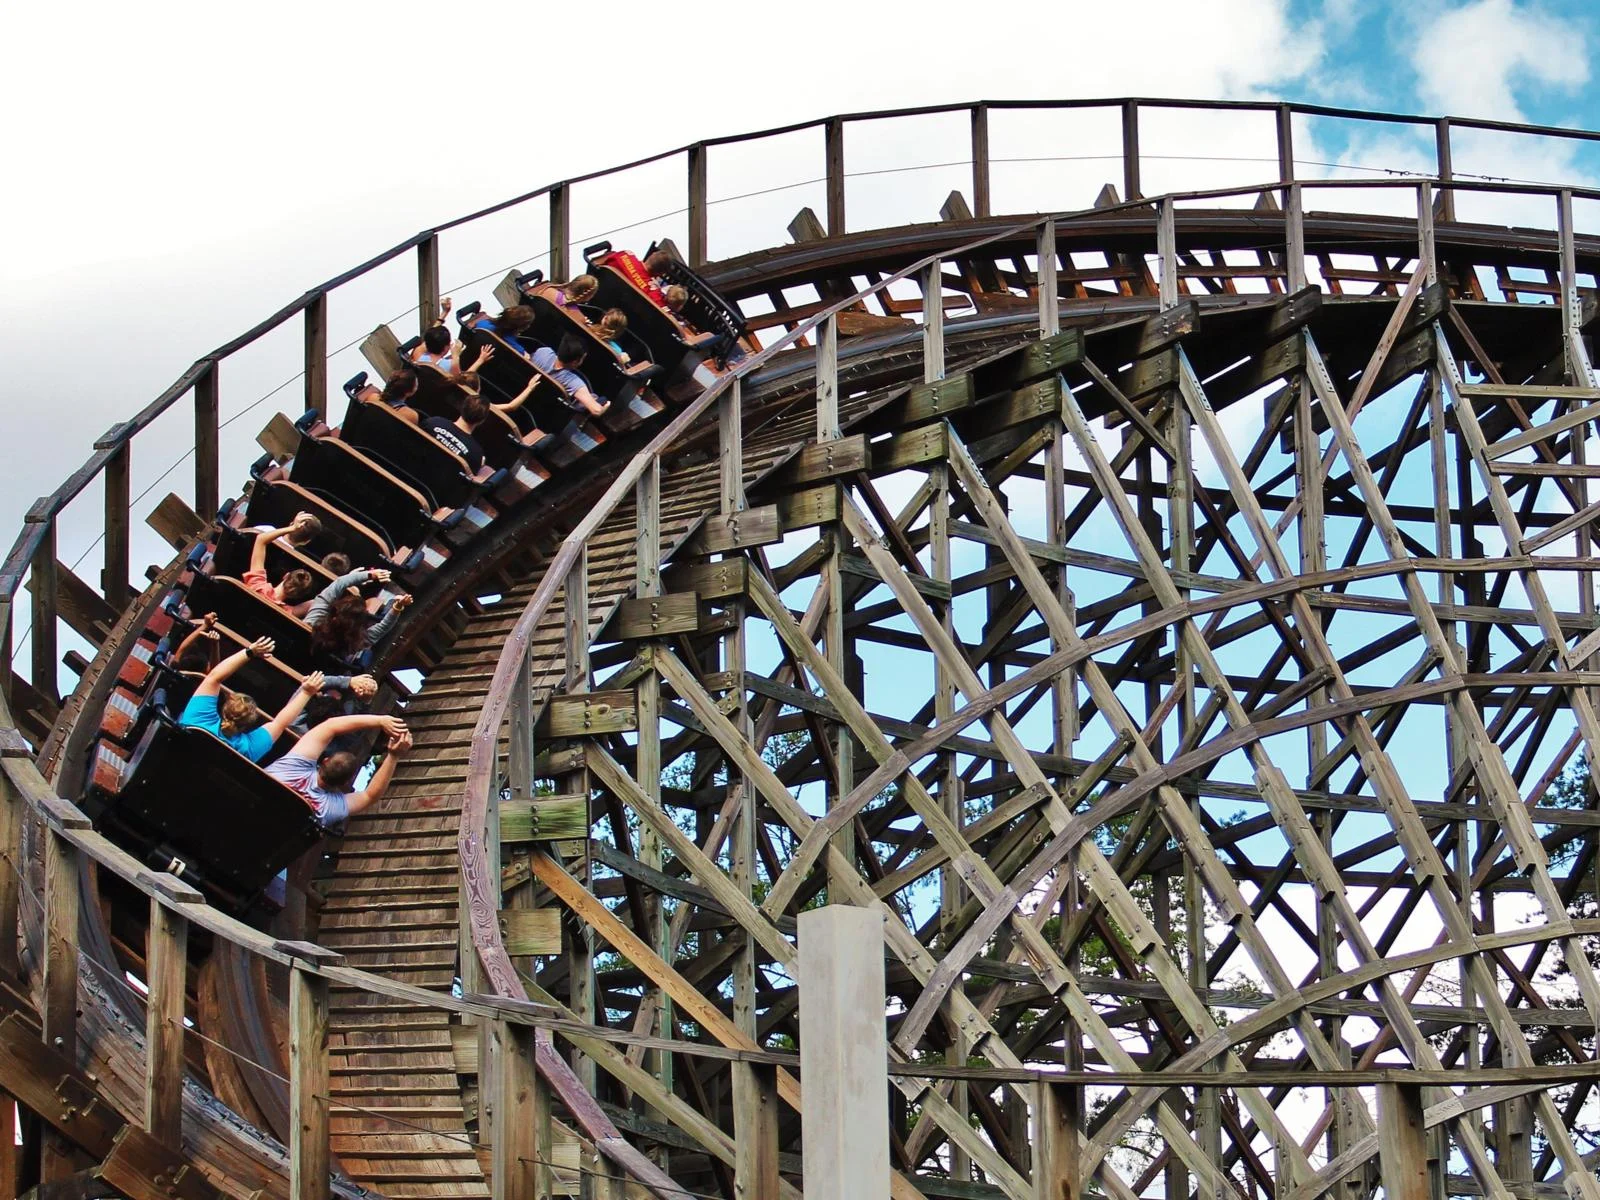 Visitors raise their hands as the wooden roller coaster in Dollywood in Pigeon Forge, Tennessee takes a swerve, a piece on the best roller coaster parks in the US